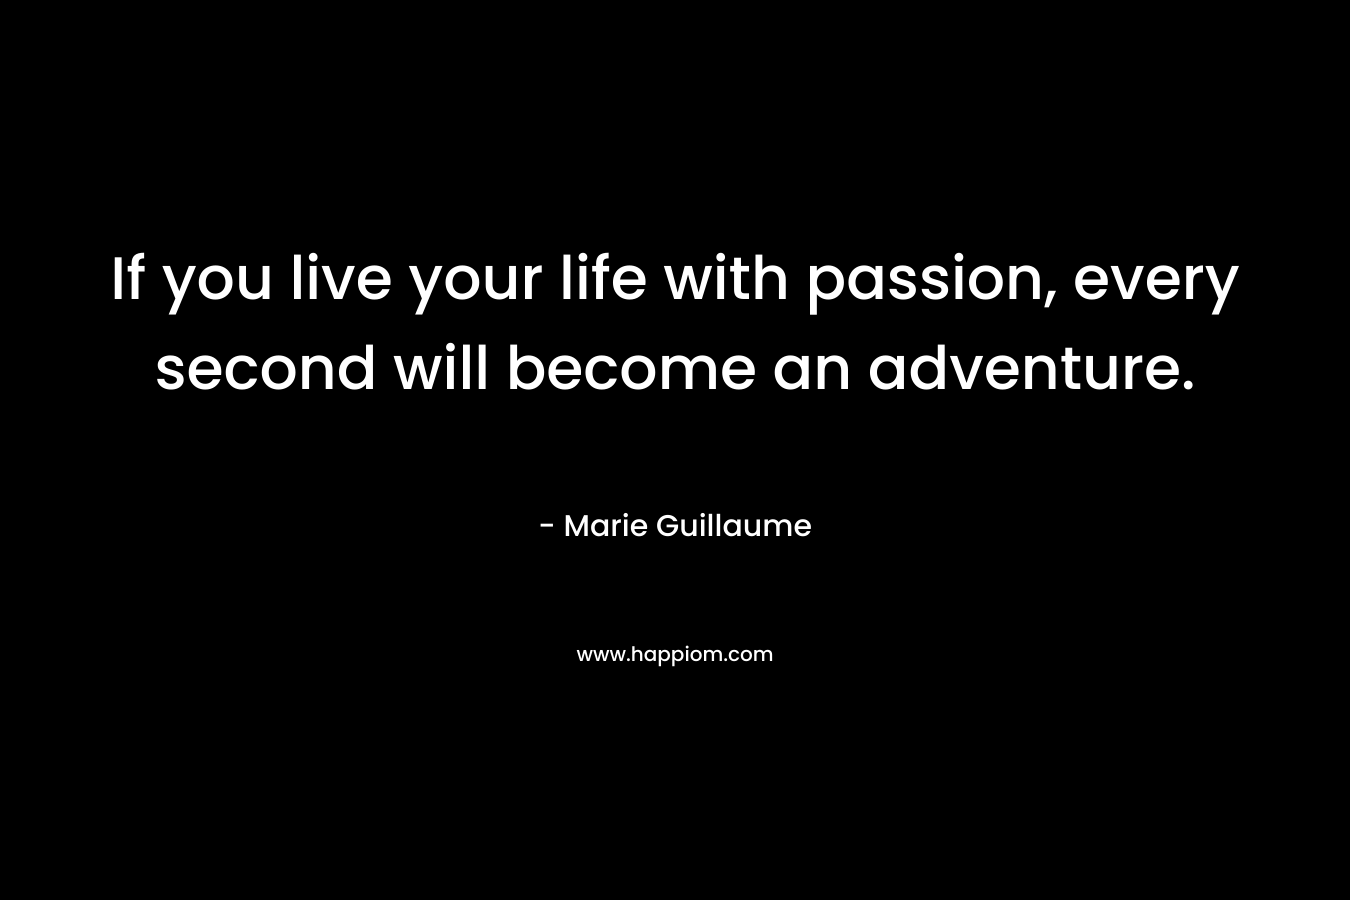 If you live your life with passion, every second will become an adventure. – Marie Guillaume